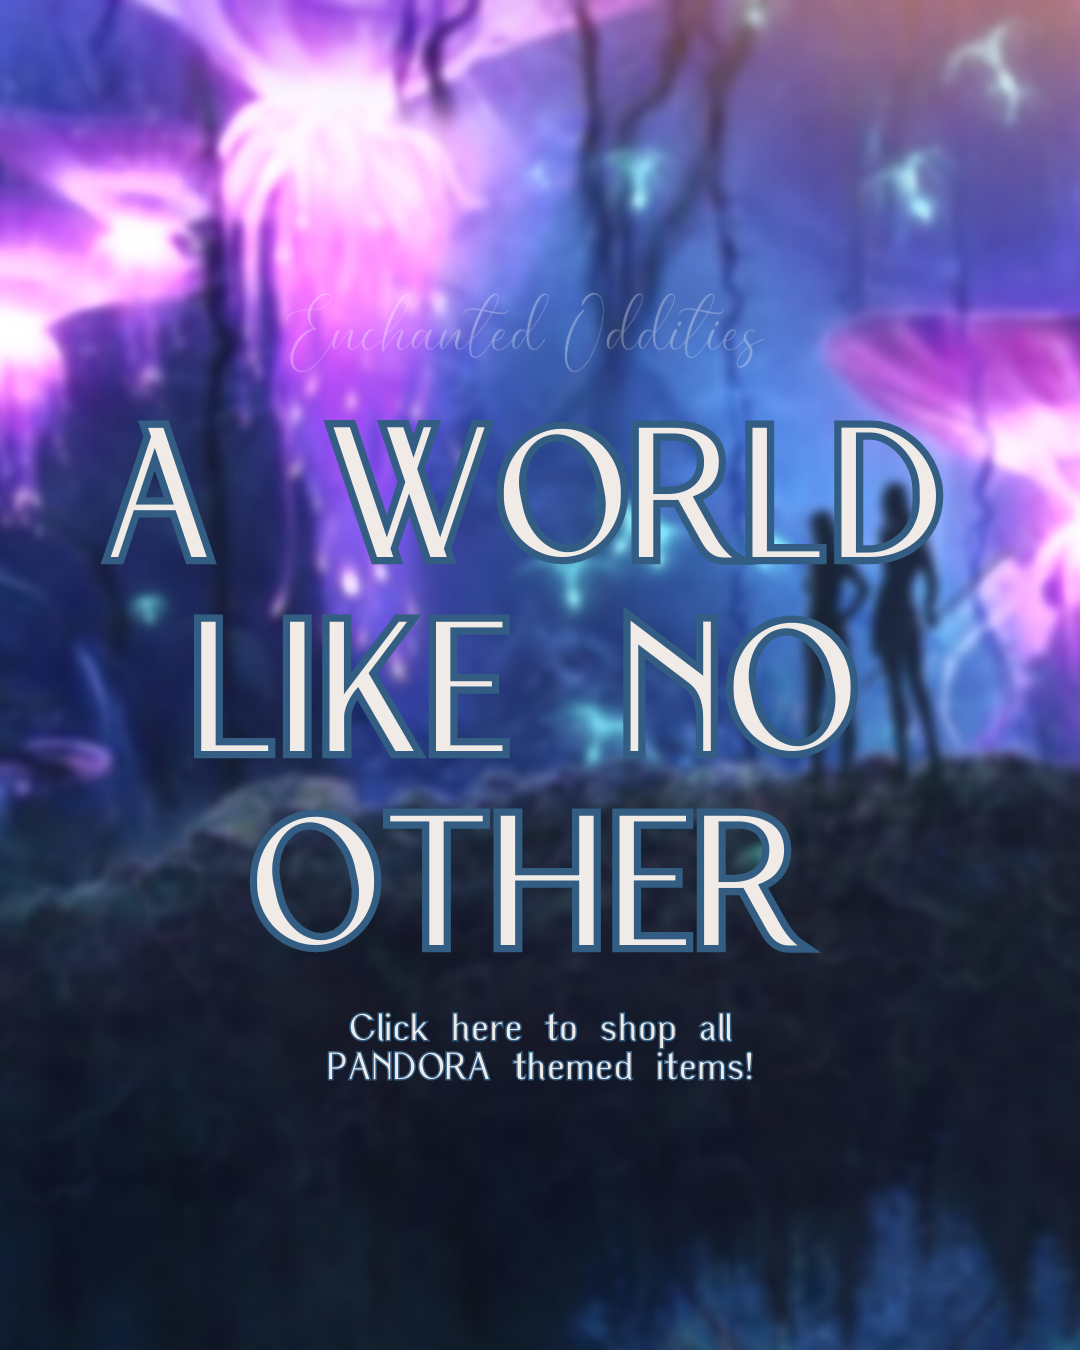 ✧ A WORLD LIKE NO OTHER ✧